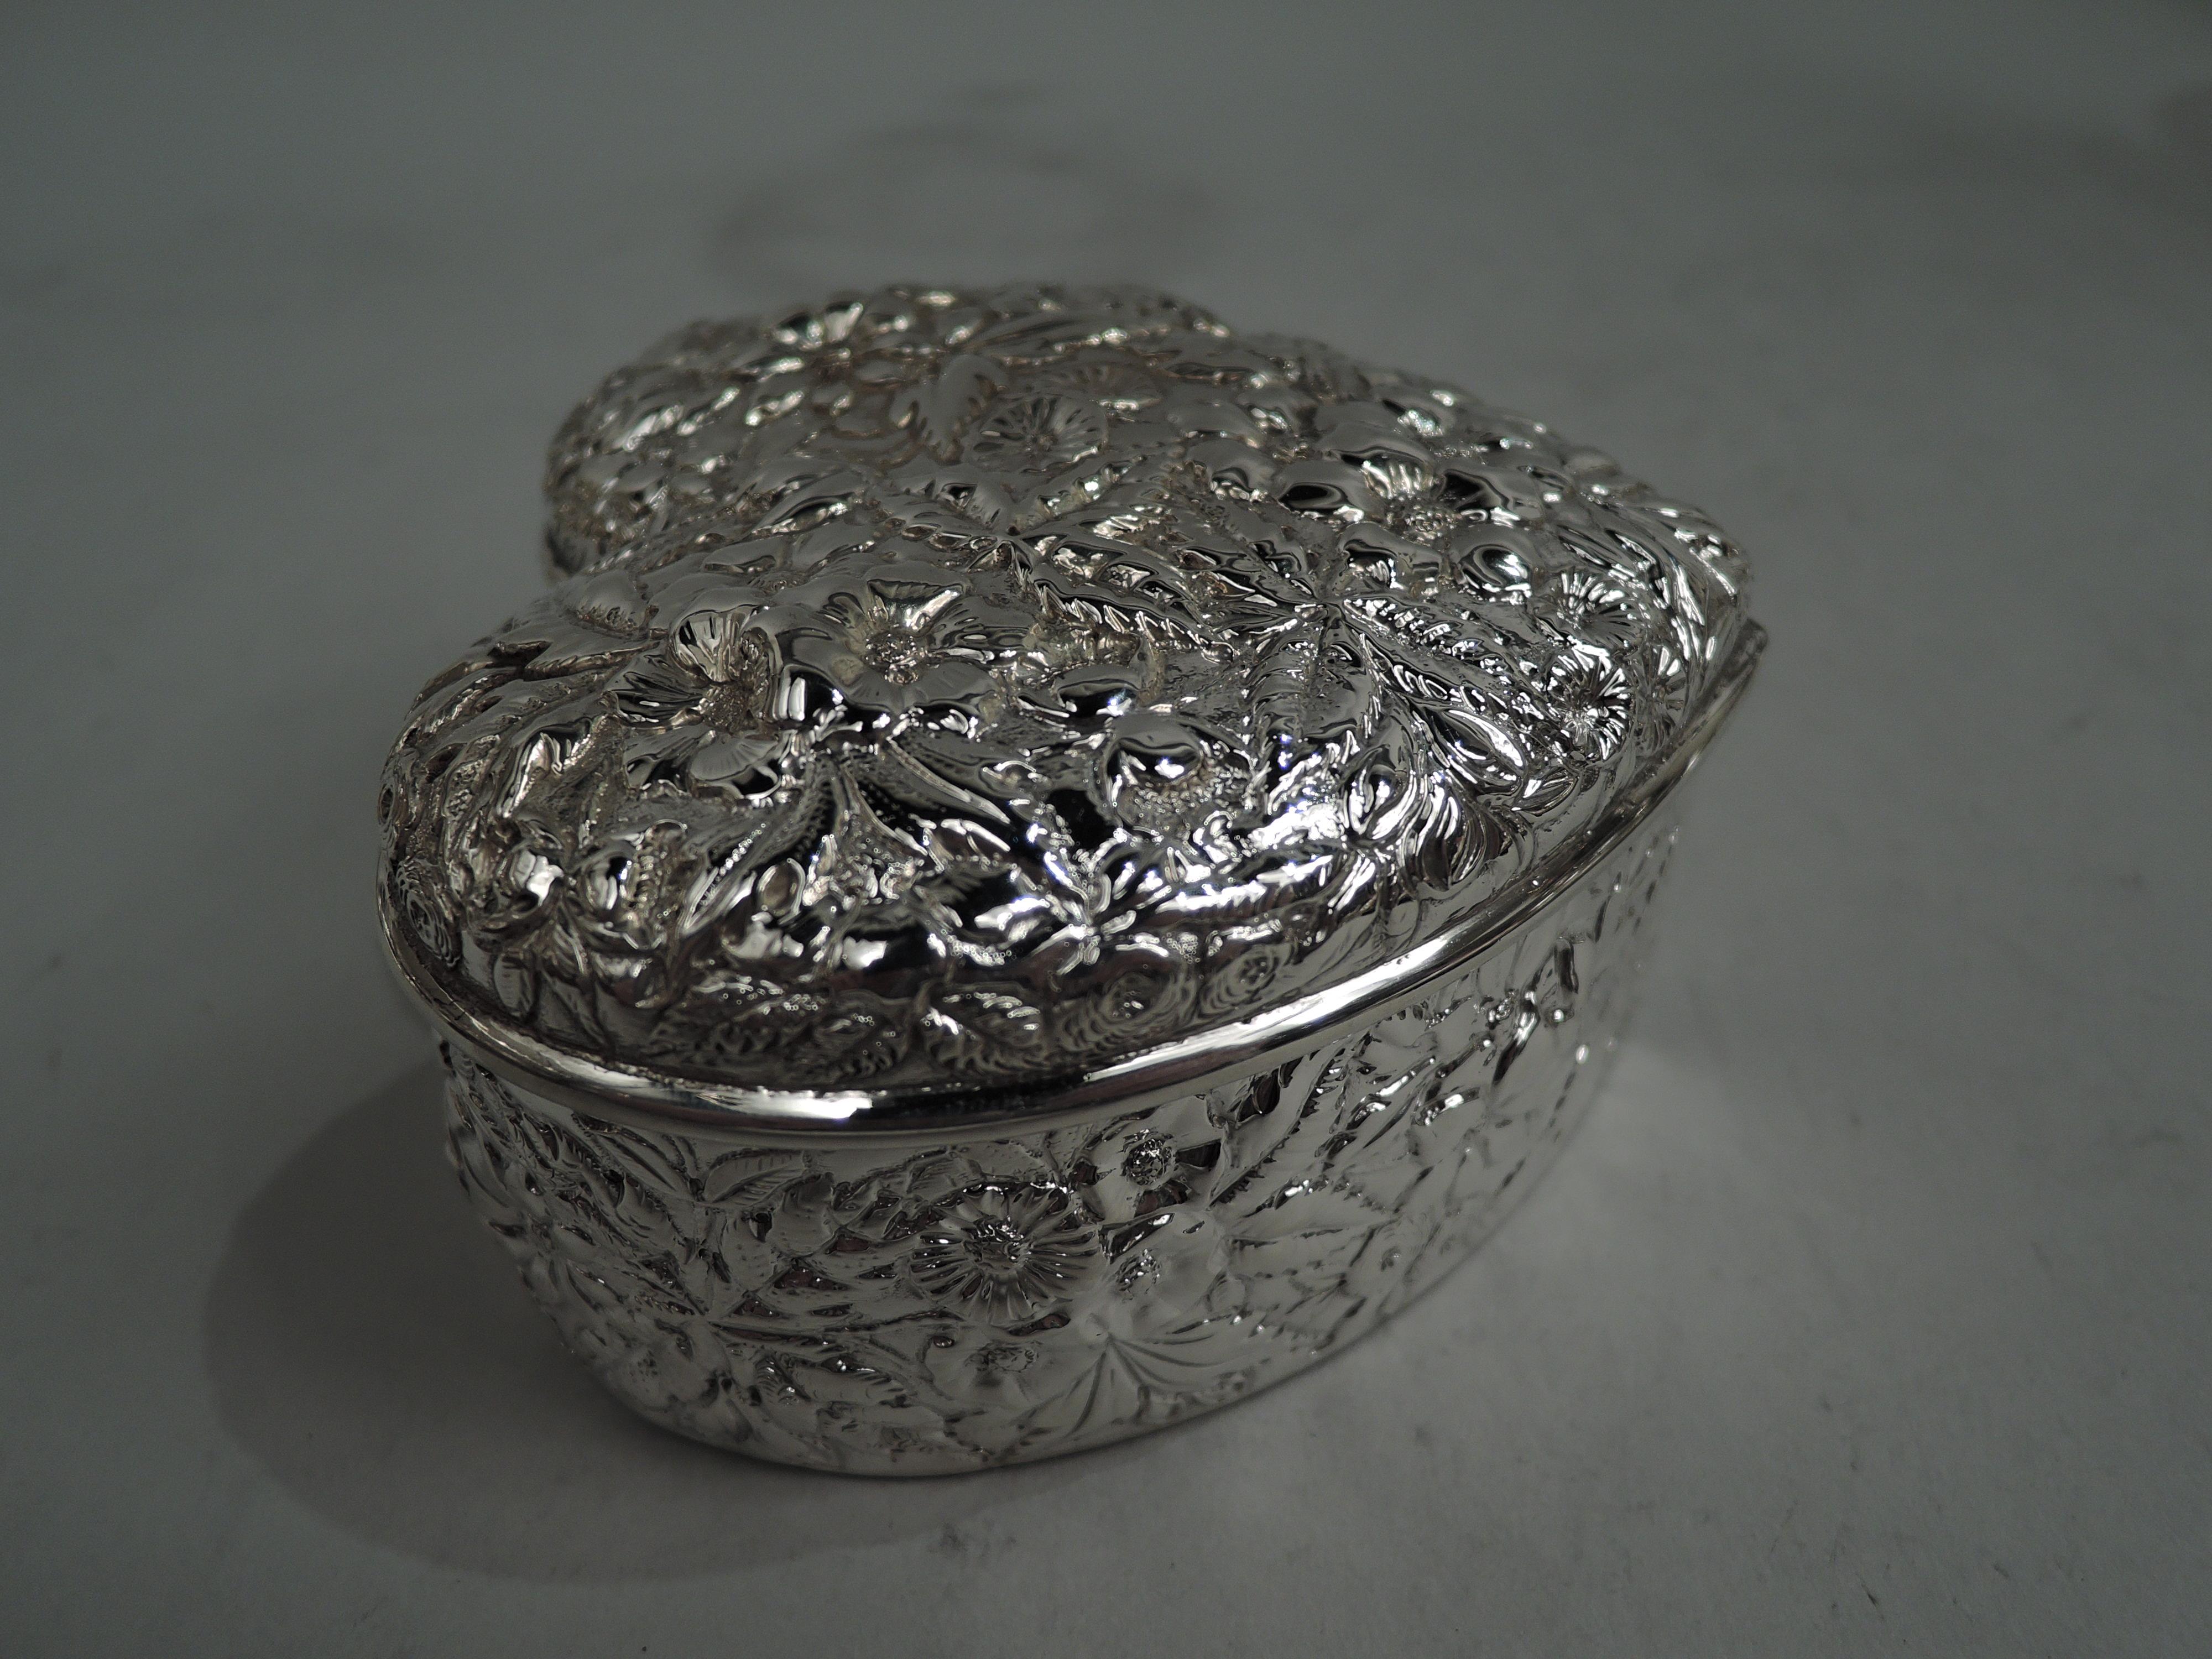 Victorian sterling silver trinket box. Made by A. Jacobi & Co. in Baltimore, ca 1890. Heart-Shaped with straight sides and raised cover. Allover floral repousse. Fully marked including maker’s stamp. Weight: 7.4 troy ounces.